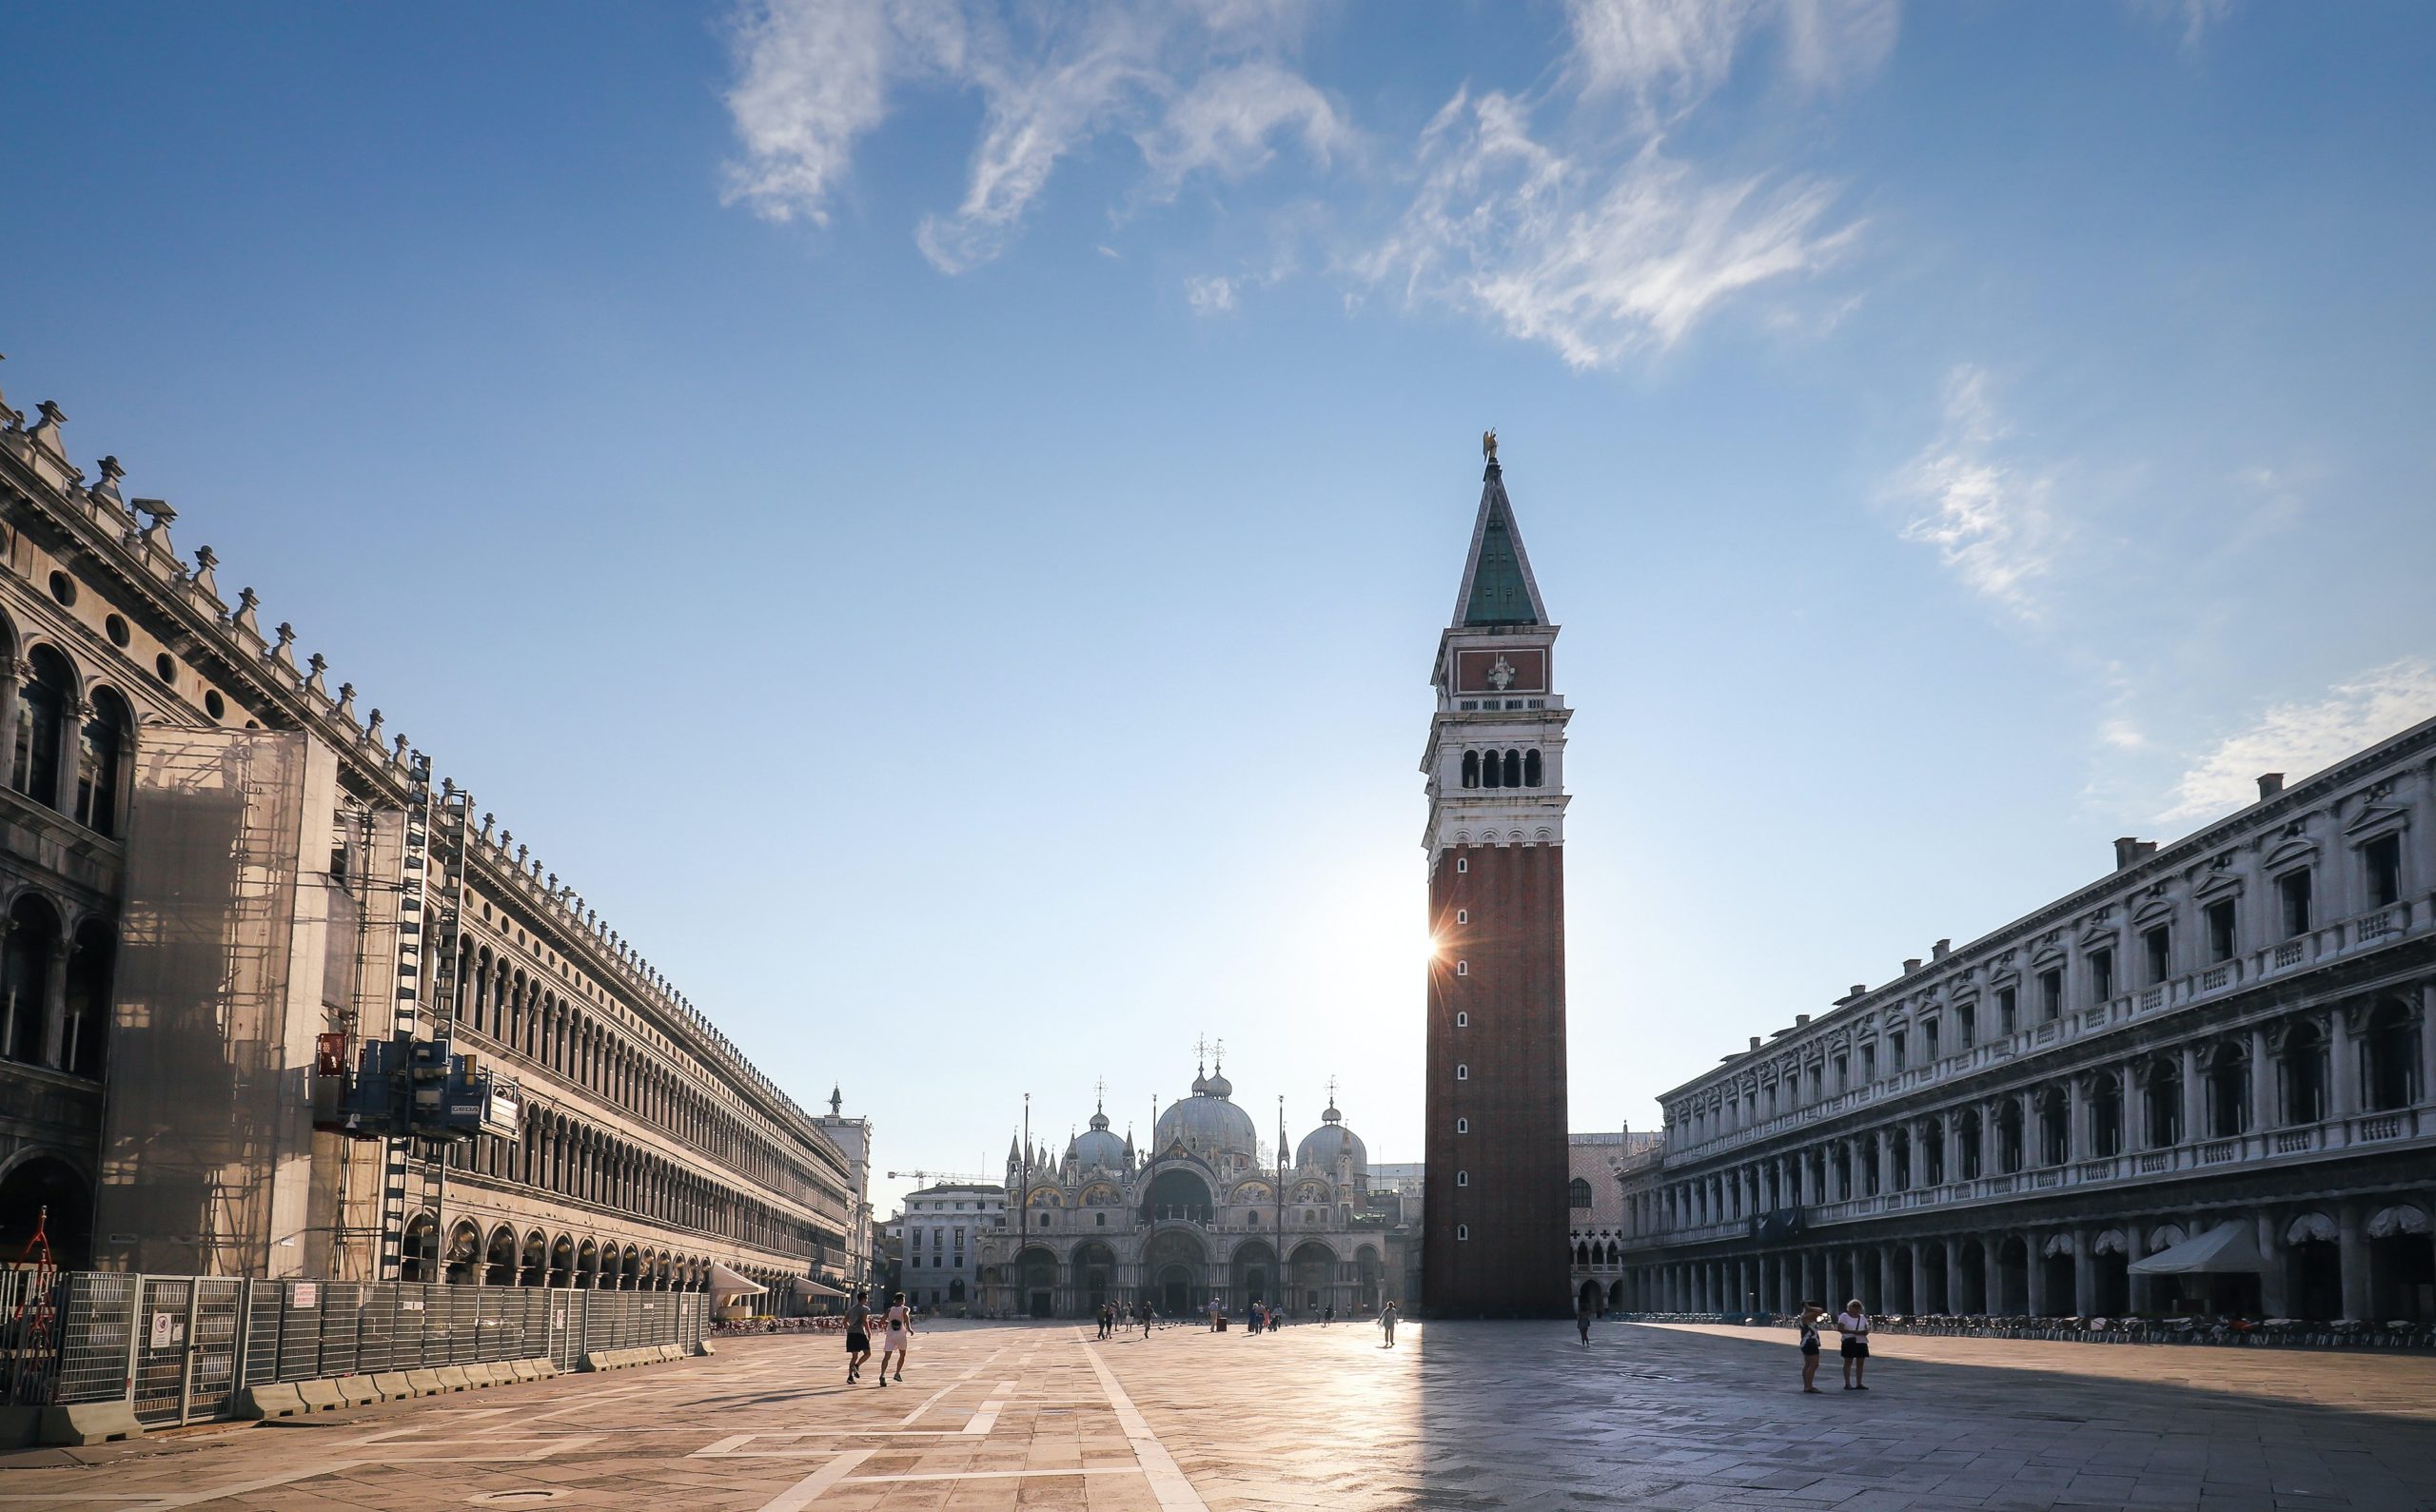 St. Mark's Square in Venice, St. Mark's clock tower is visible